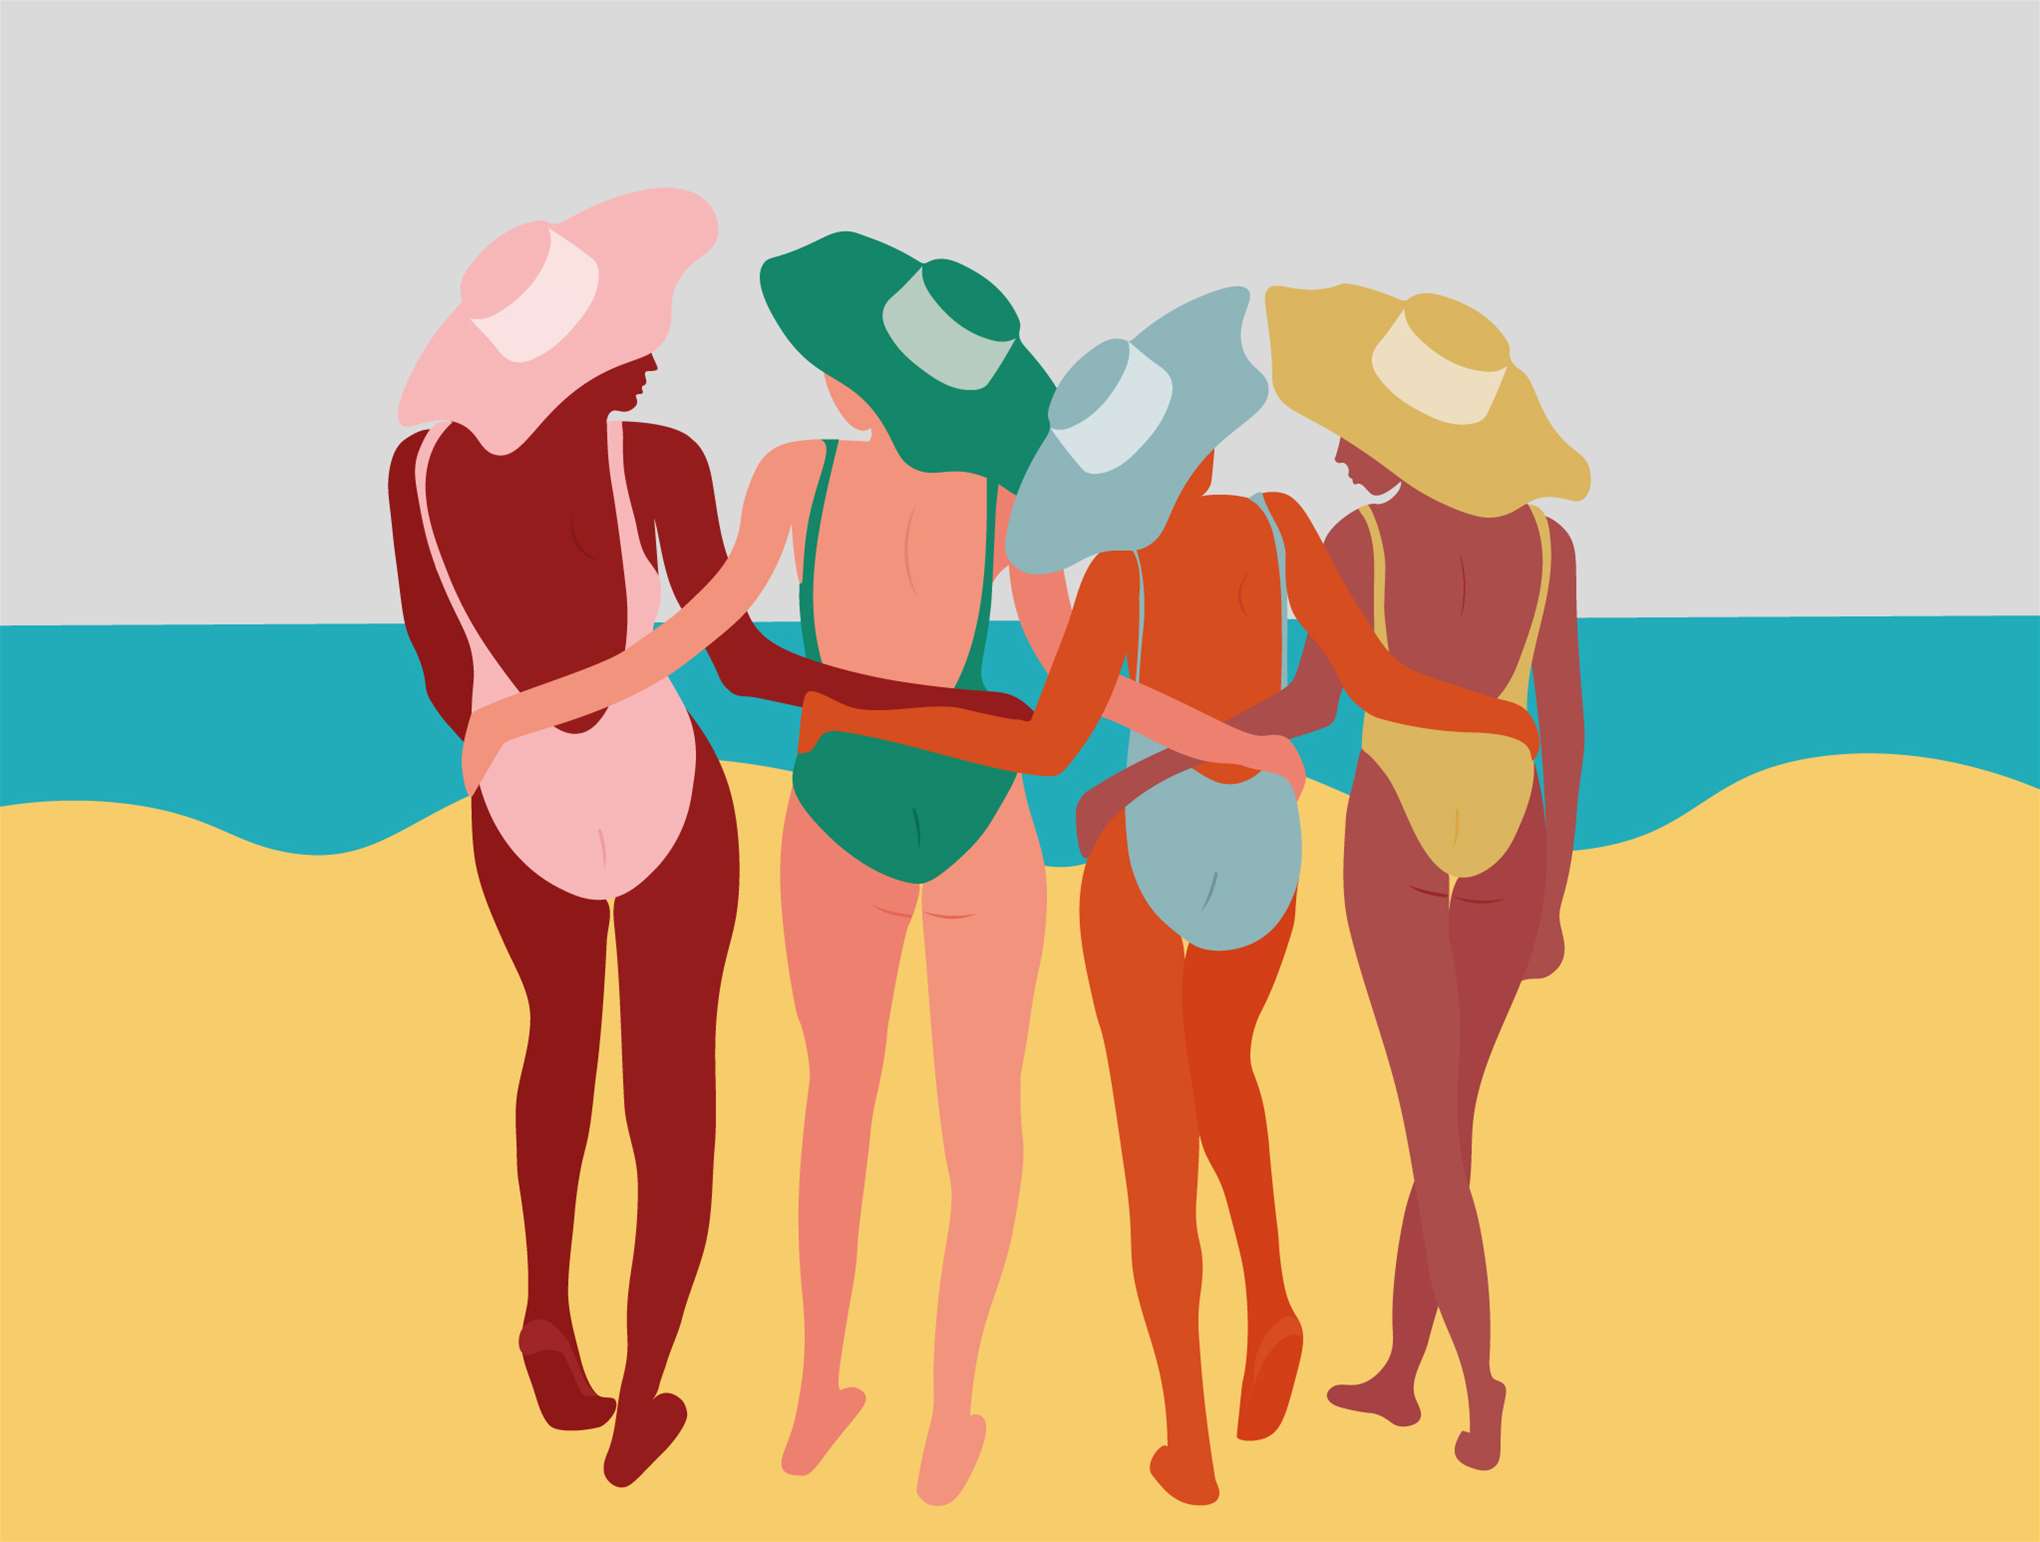 Camila Pinheiro, Bright vector illustration of 4 women in swimming costumes with vibrant summer patterns. Geometric shapes.  